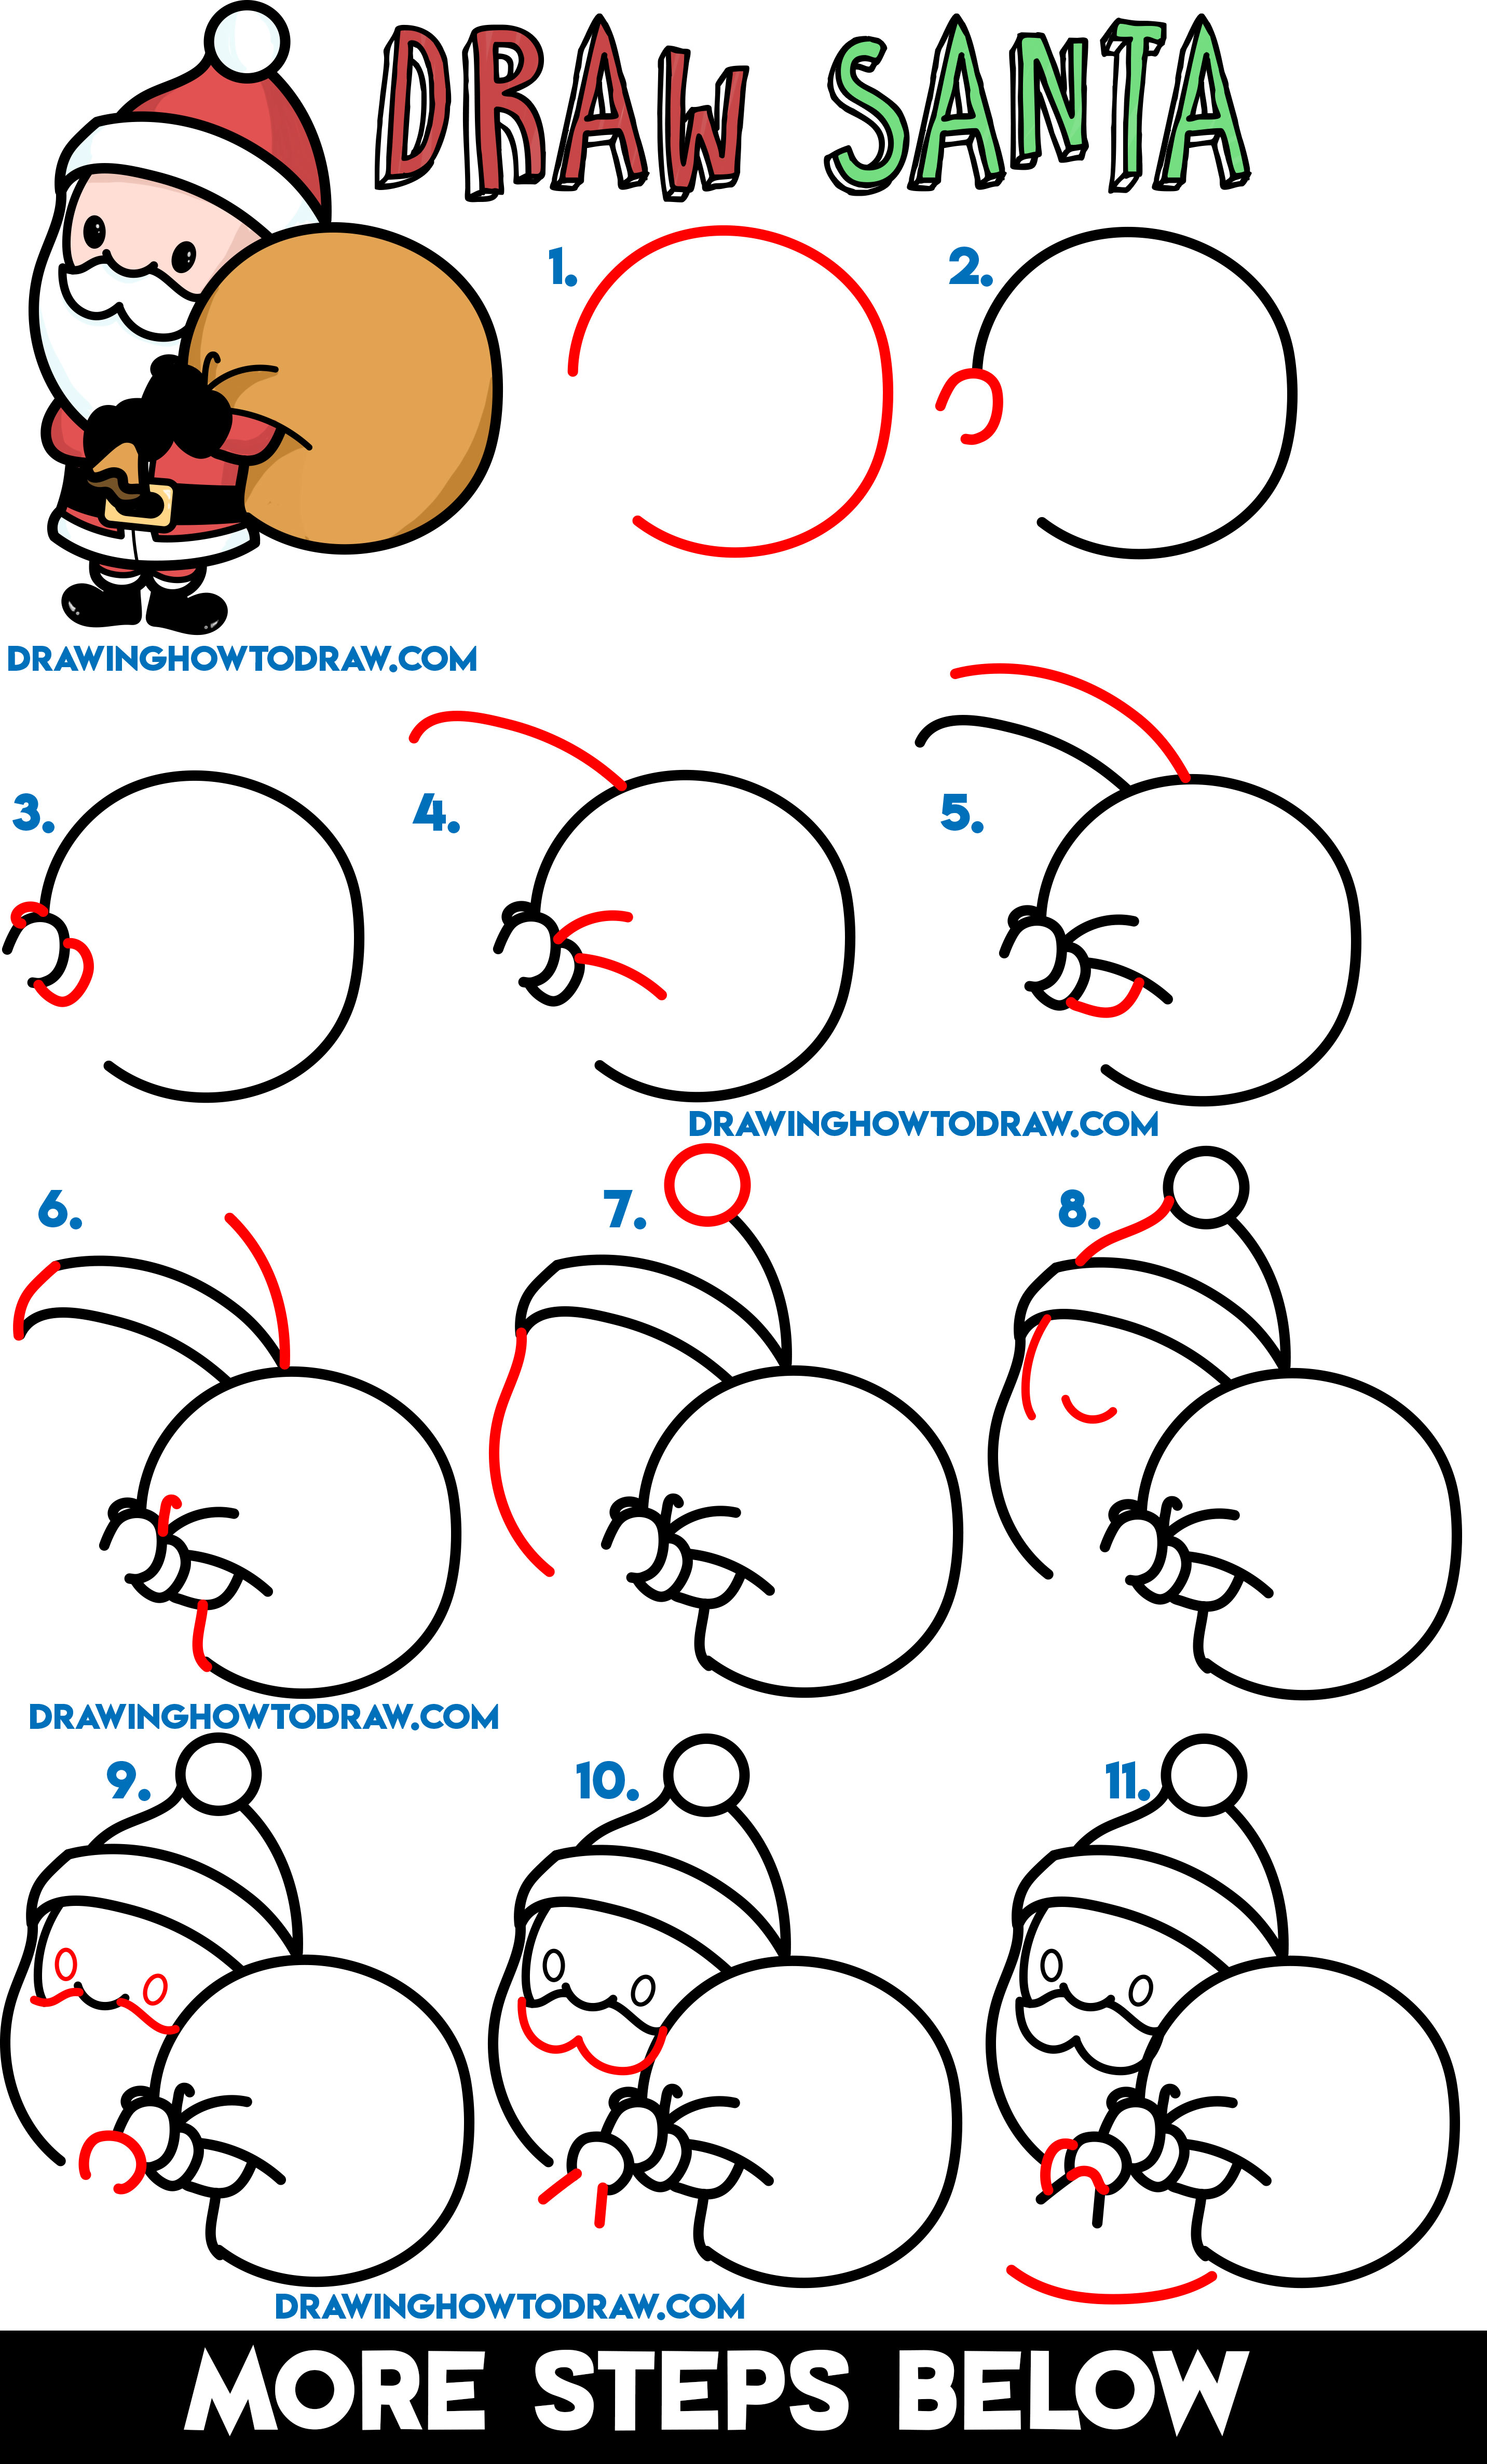 Backpack Drawing Tutorial - How to draw Backpack step by step